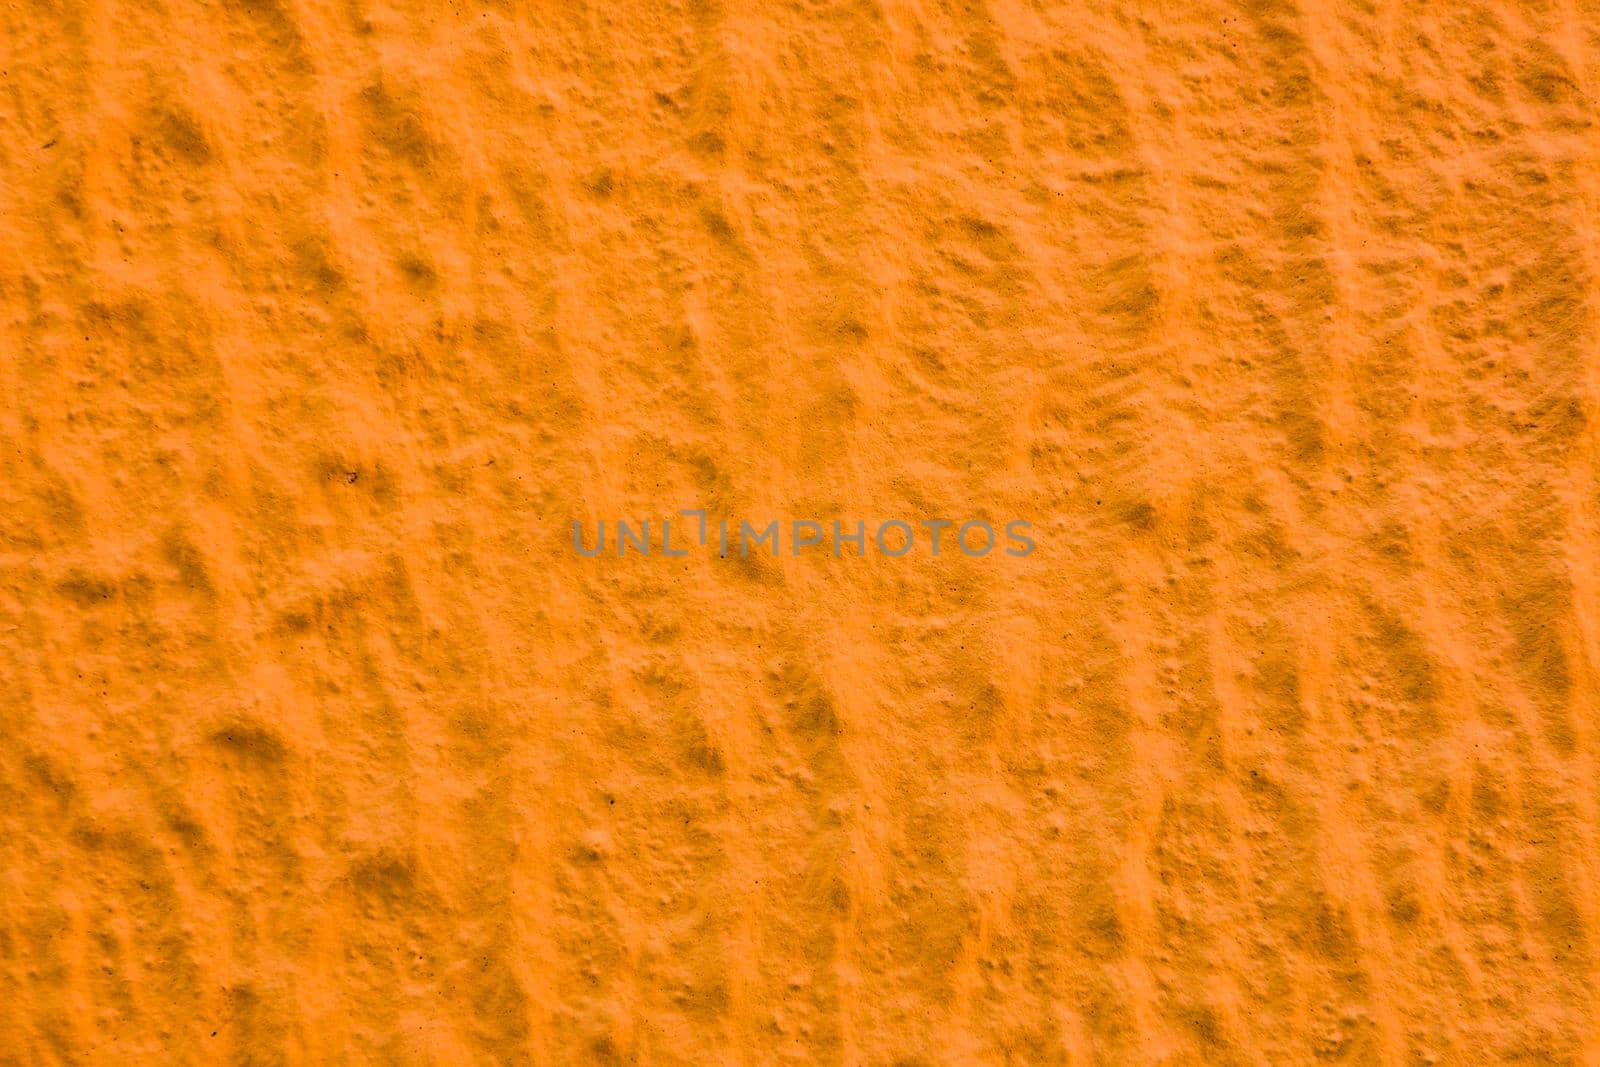 Uneven abstract texture of yellow paint. Abstract background of orange plaster.